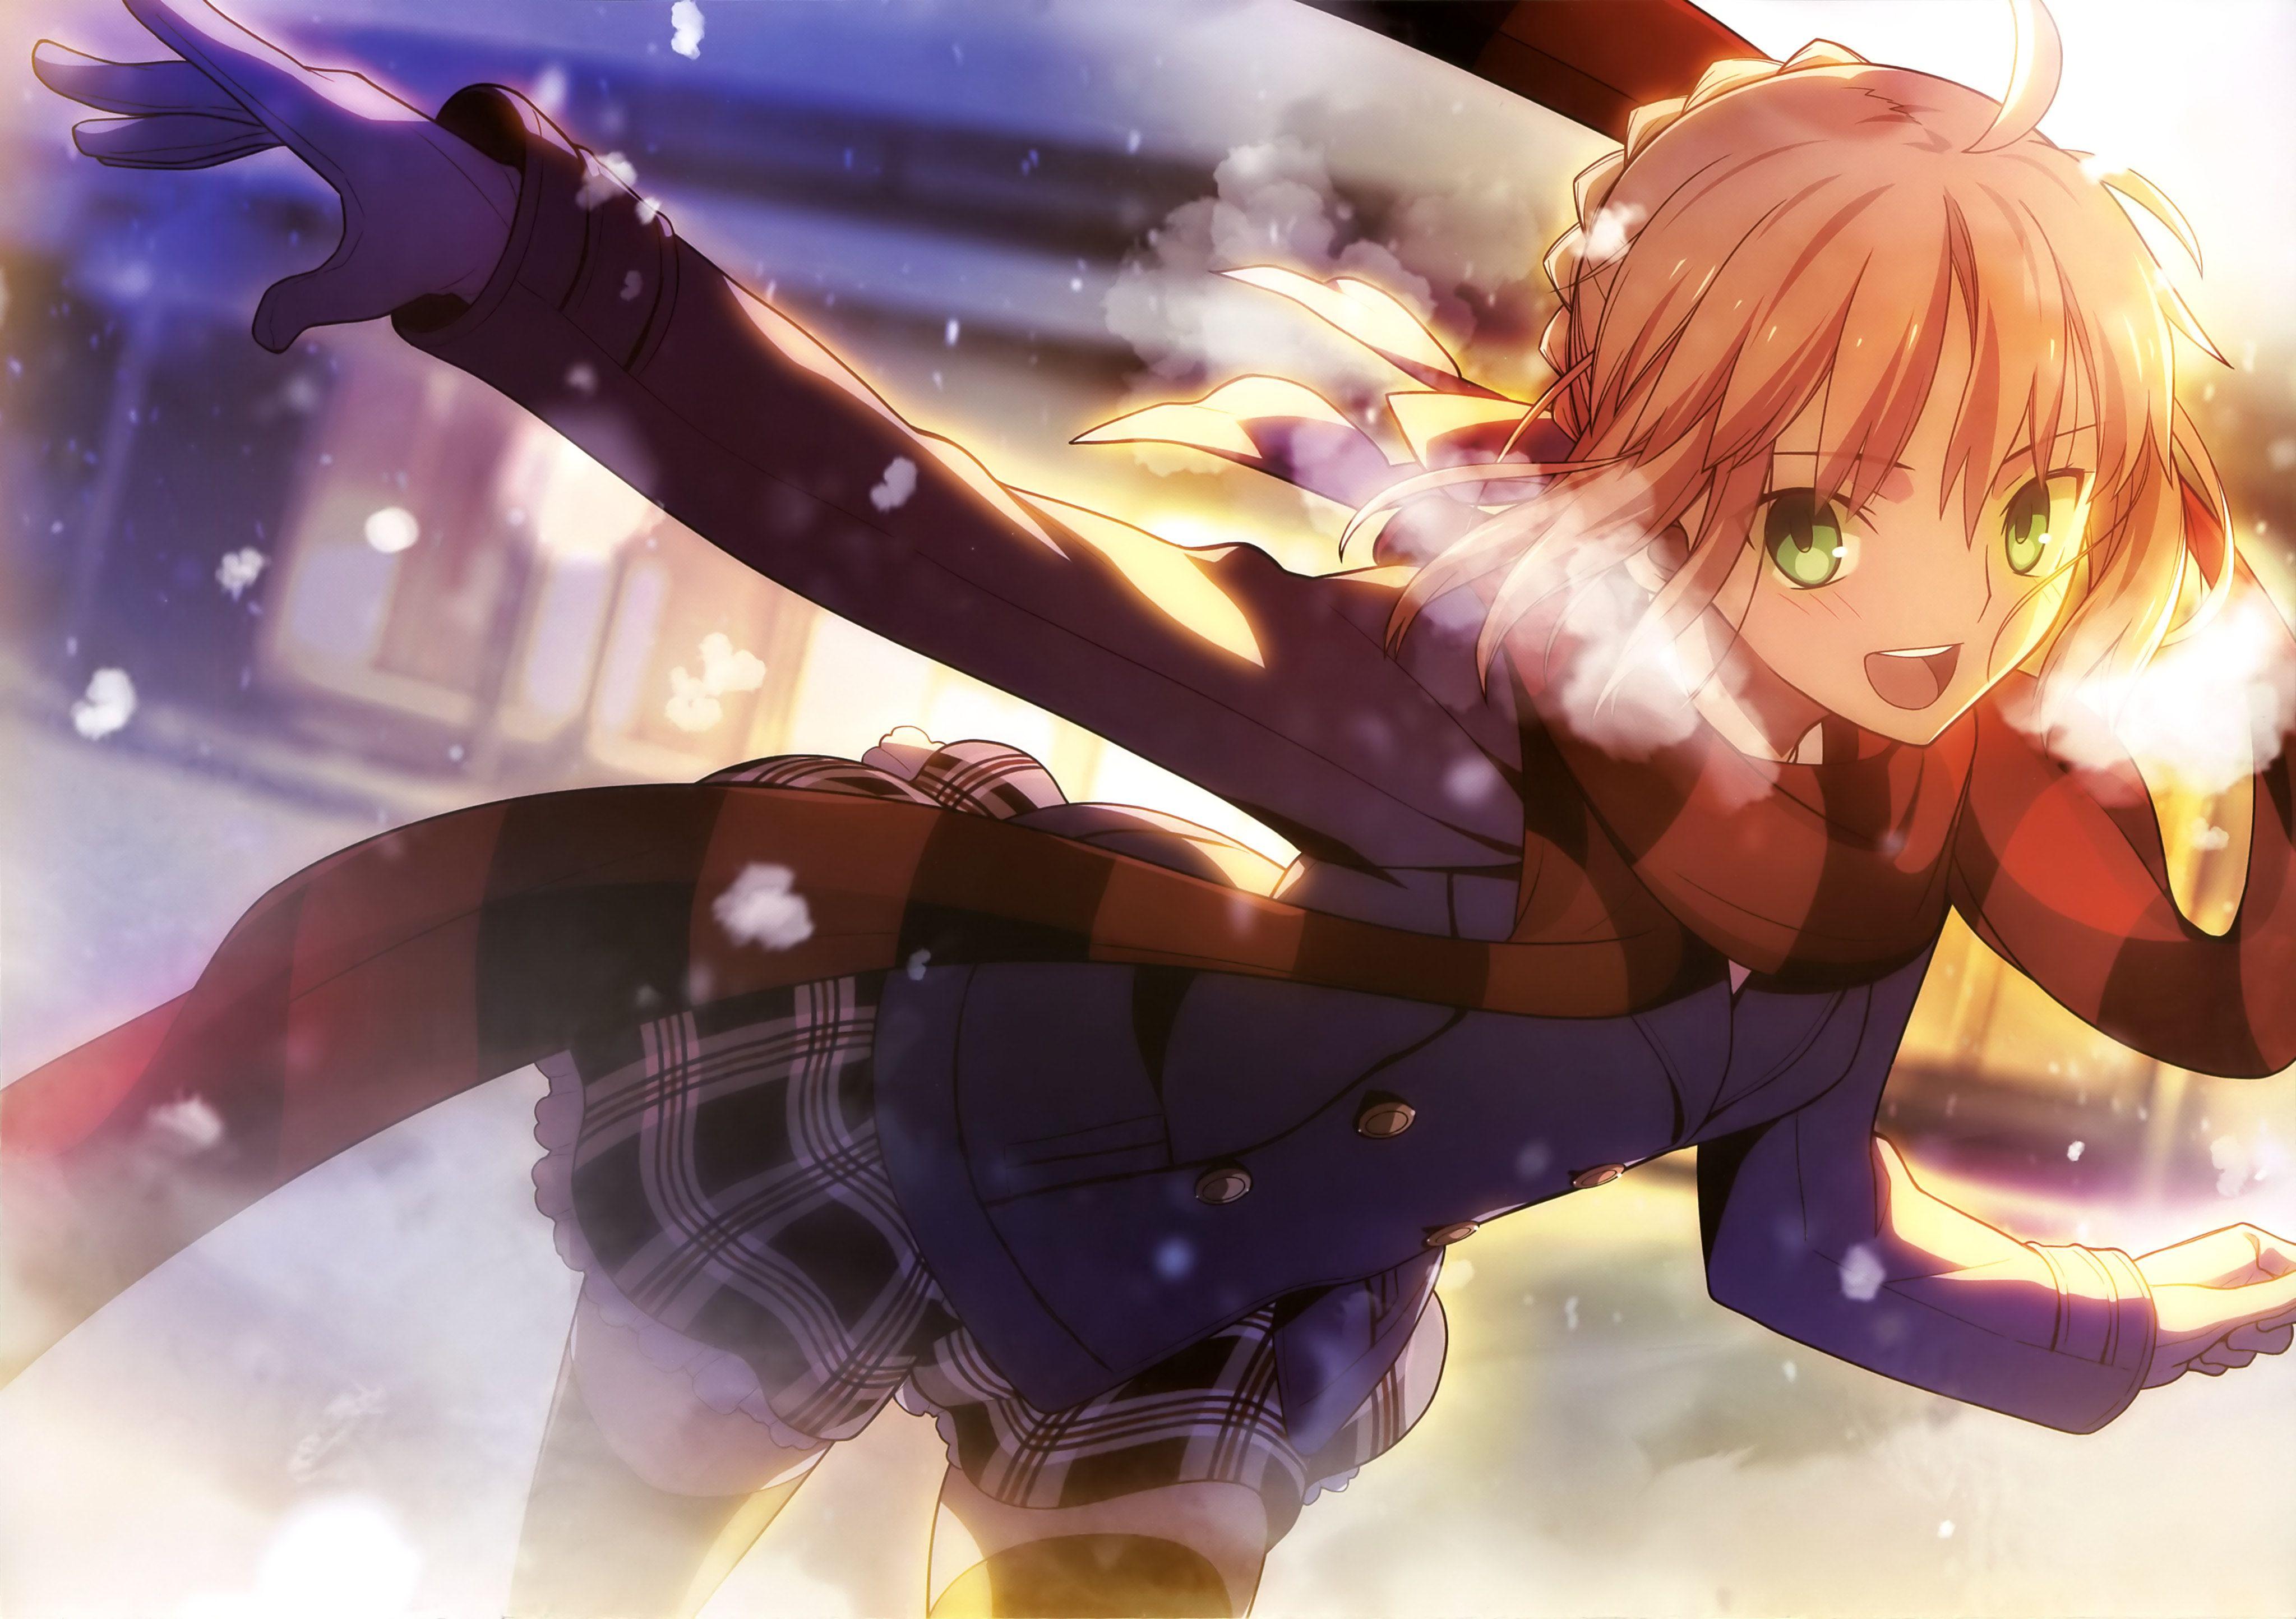 Saber (Fate Series) HD Wallpaper and Background Image